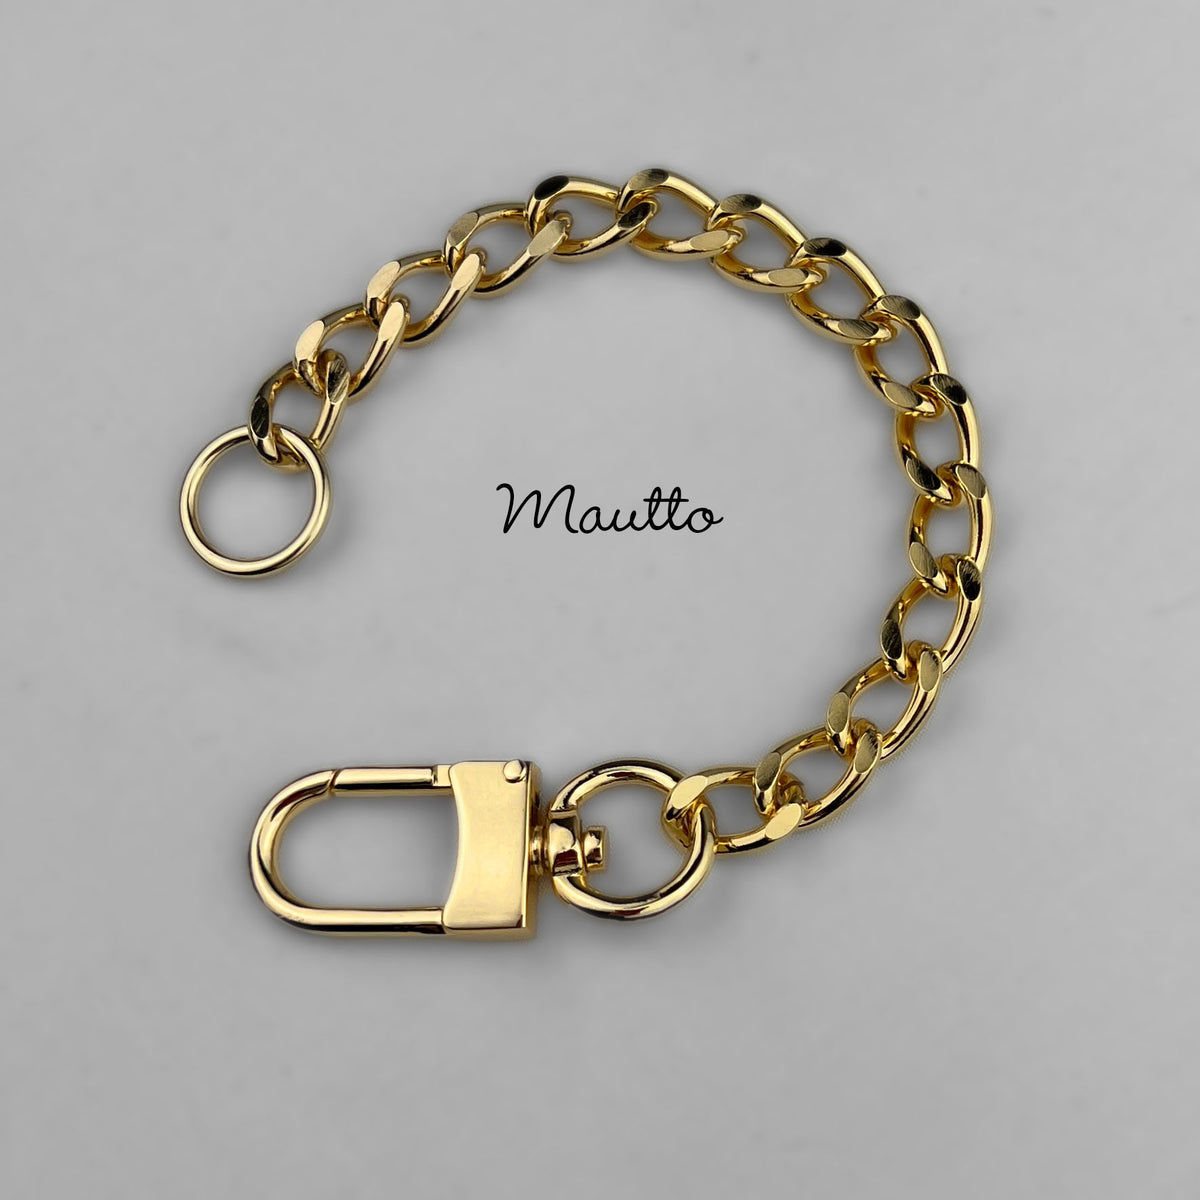 Strap Extender for LV & more - Large Clip for Bags with Thick Hardware -  Heavy Duty Gold-tone Chain